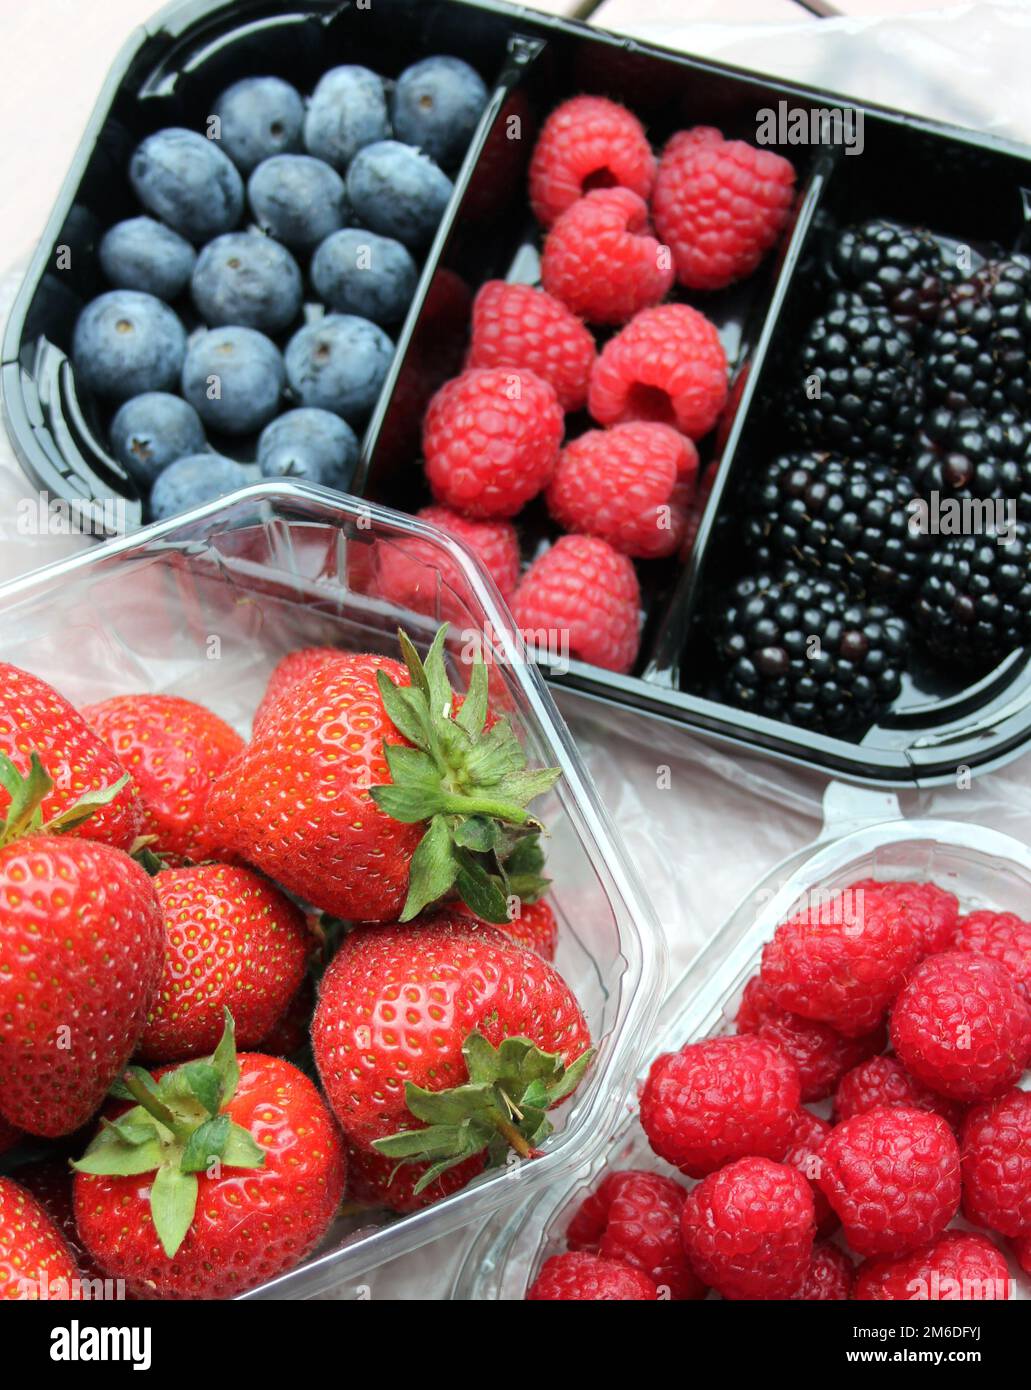 Fresh Fruits in plastic packages Stock Photo